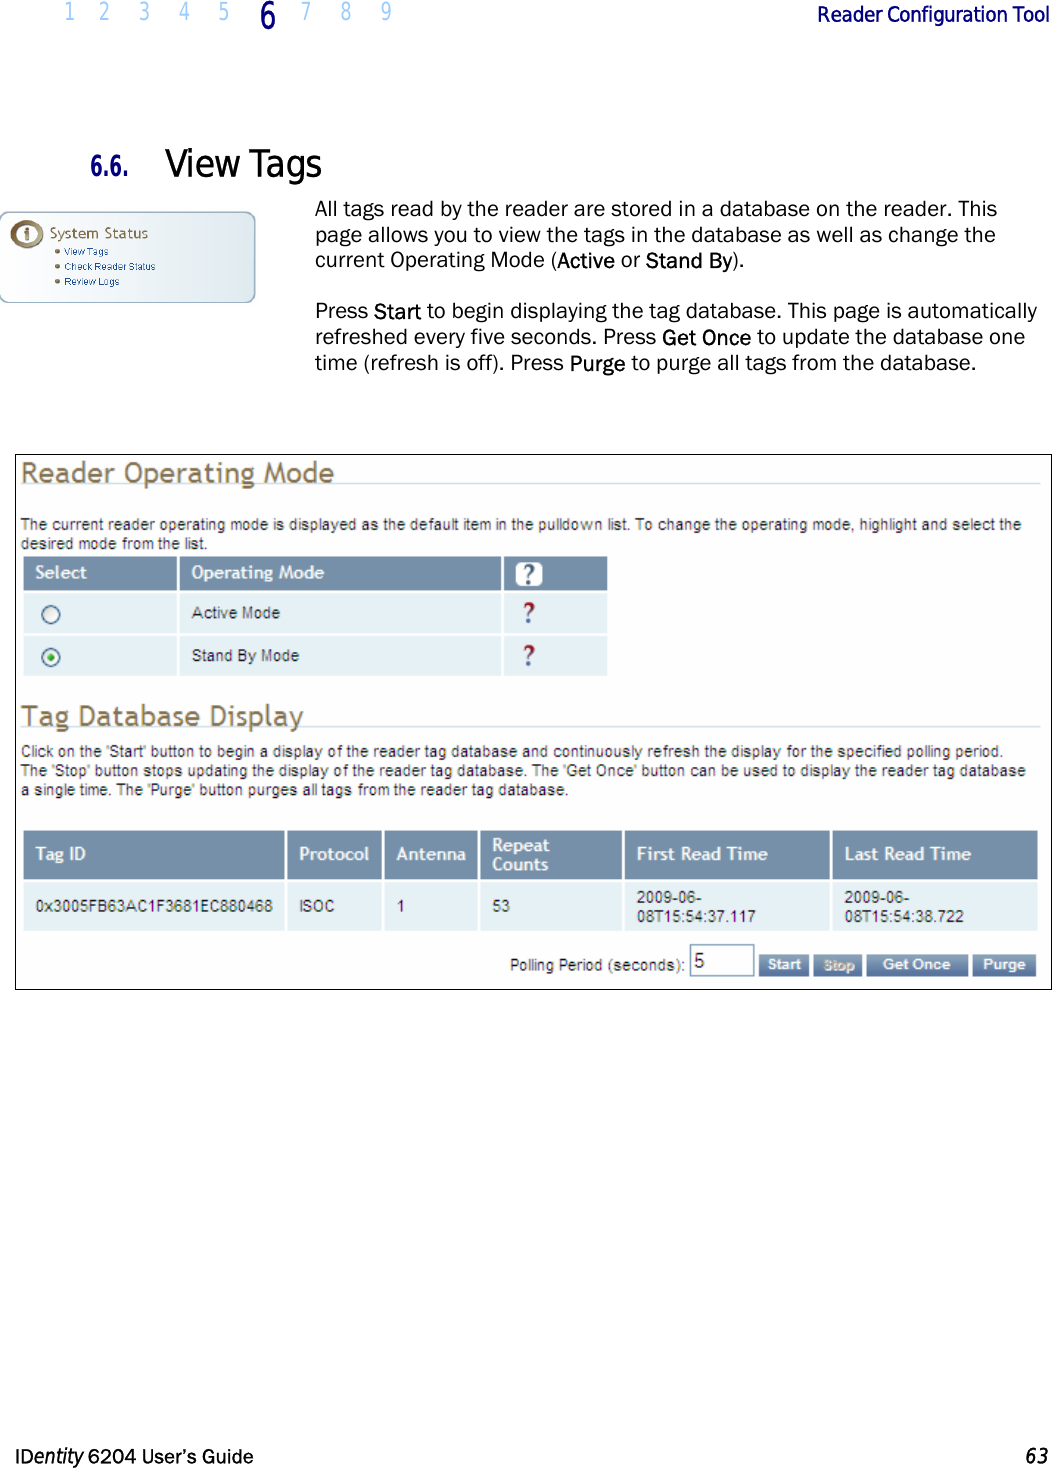  1 2 3 4 5 6  7 8 9        Reader Configuration Tool   IDentity 6204 User’s Guide  63  6.6. View Tags All tags read by the reader are stored in a database on the reader. This page allows you to view the tags in the database as well as change the current Operating Mode (Active or Stand By).  Press Start to begin displaying the tag database. This page is automatically refreshed every five seconds. Press Get Once to update the database one time (refresh is off). Press Purge to purge all tags from the database.    